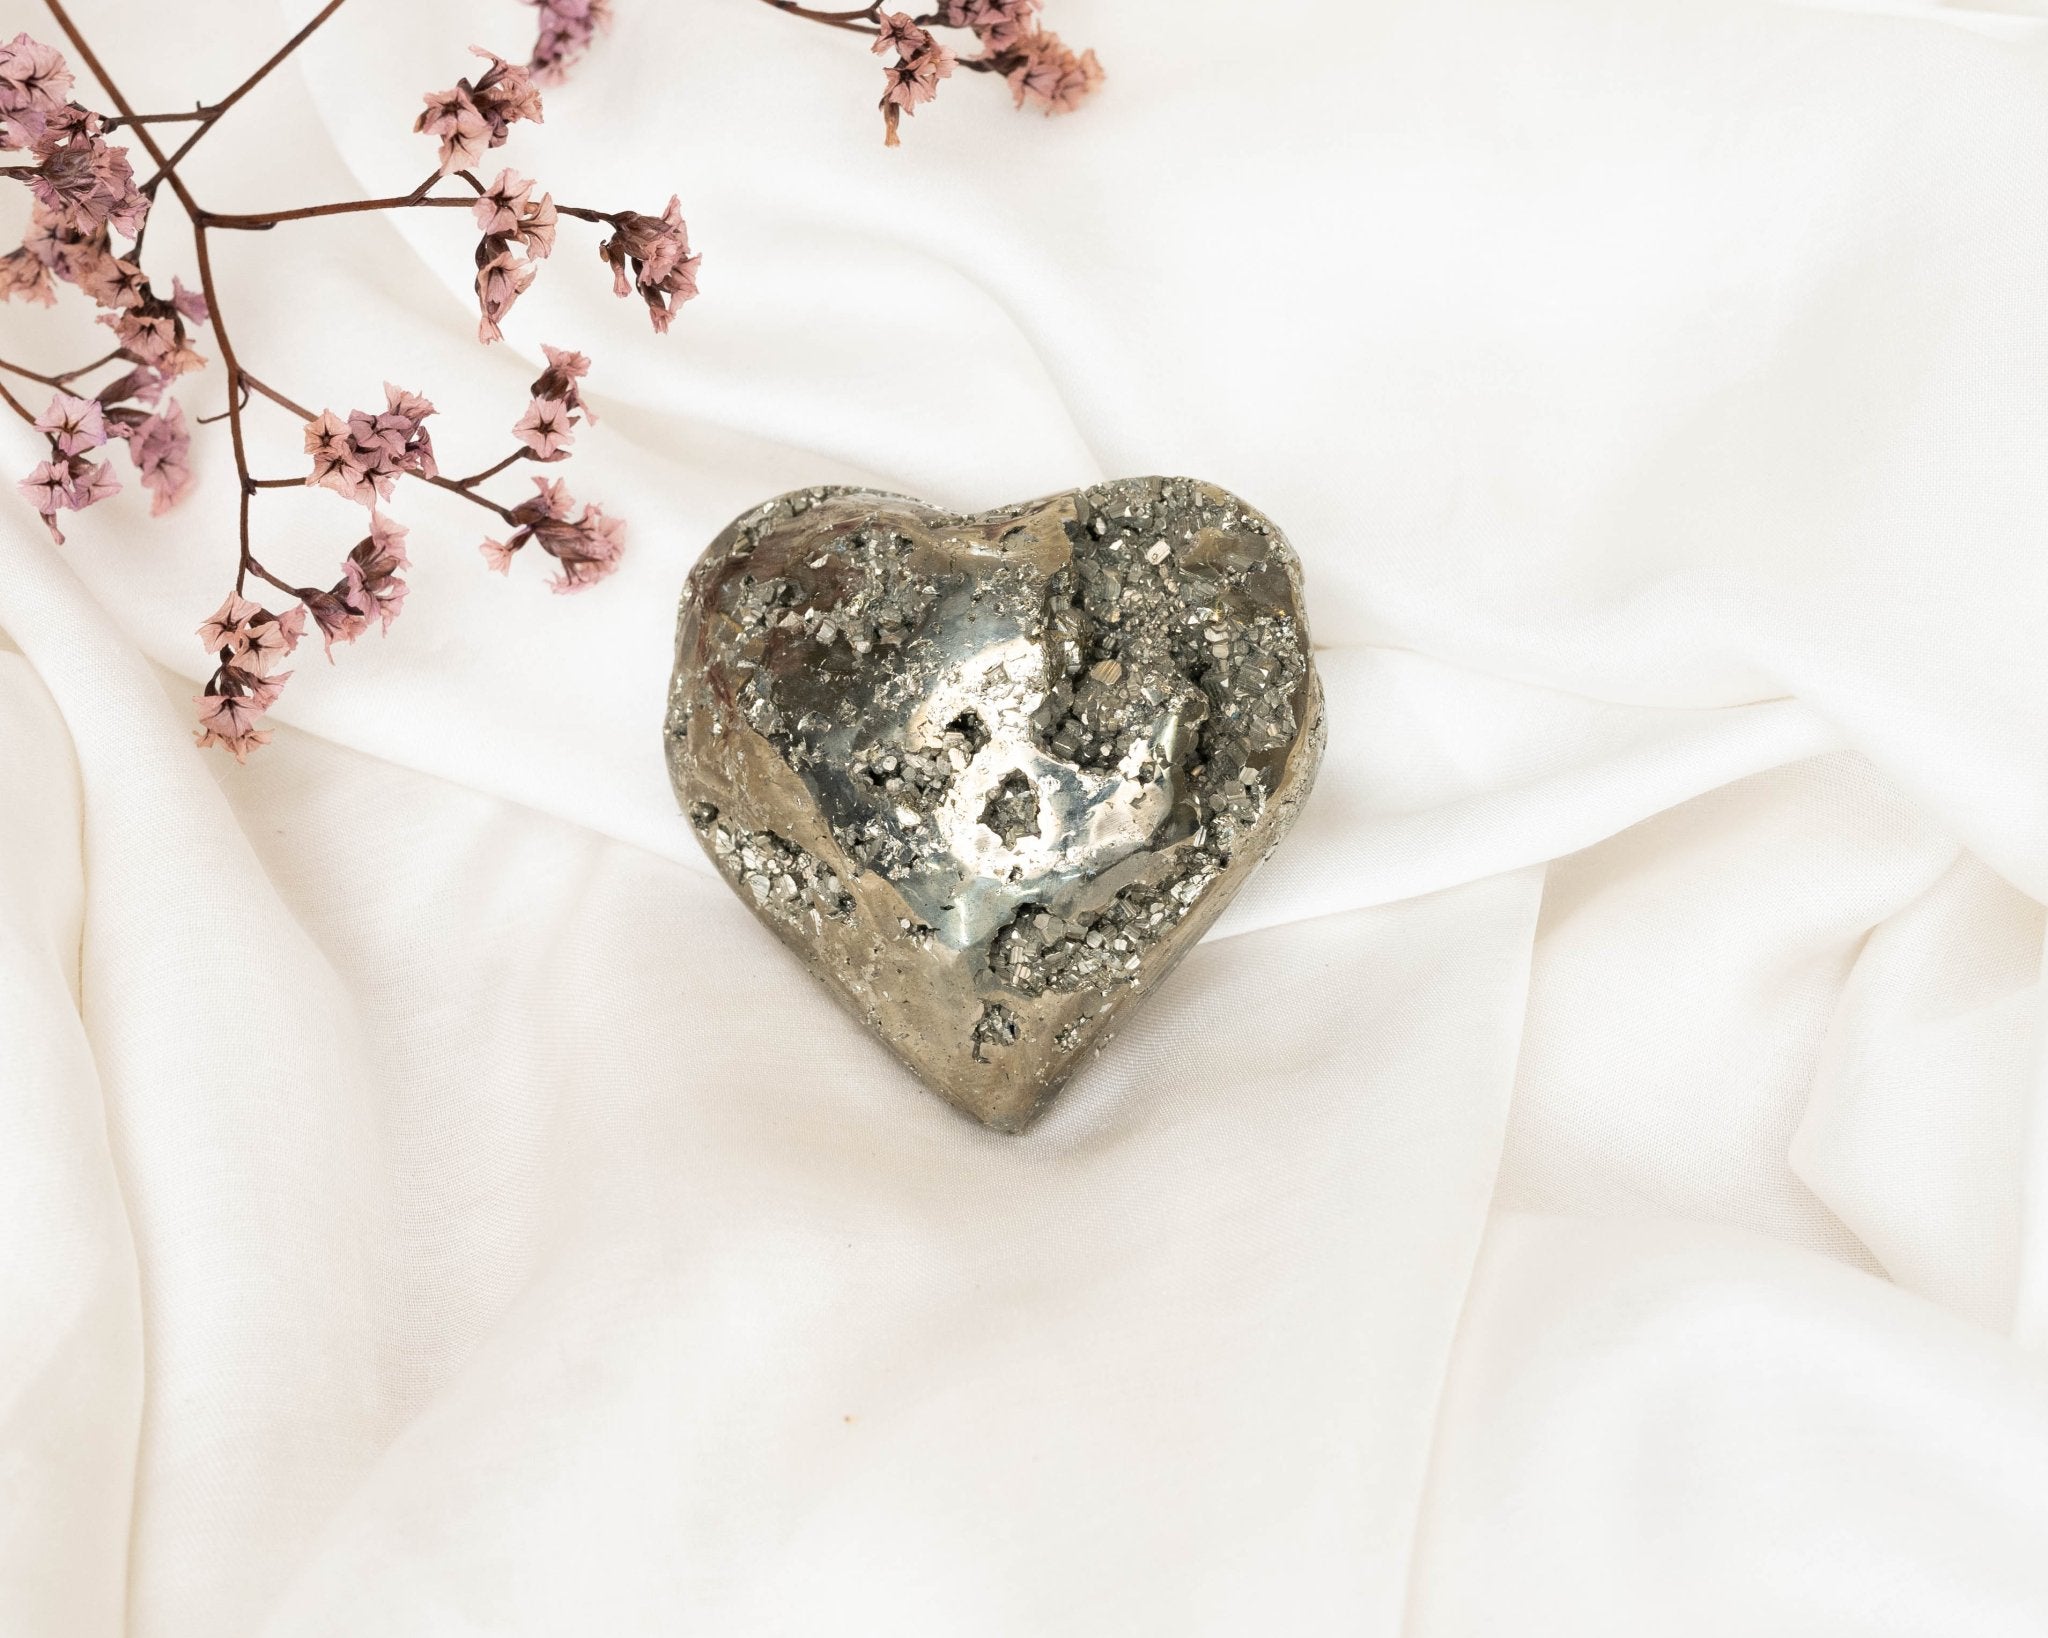 Iron Pyrite Heart 204g - Bodh Gem and Crystals